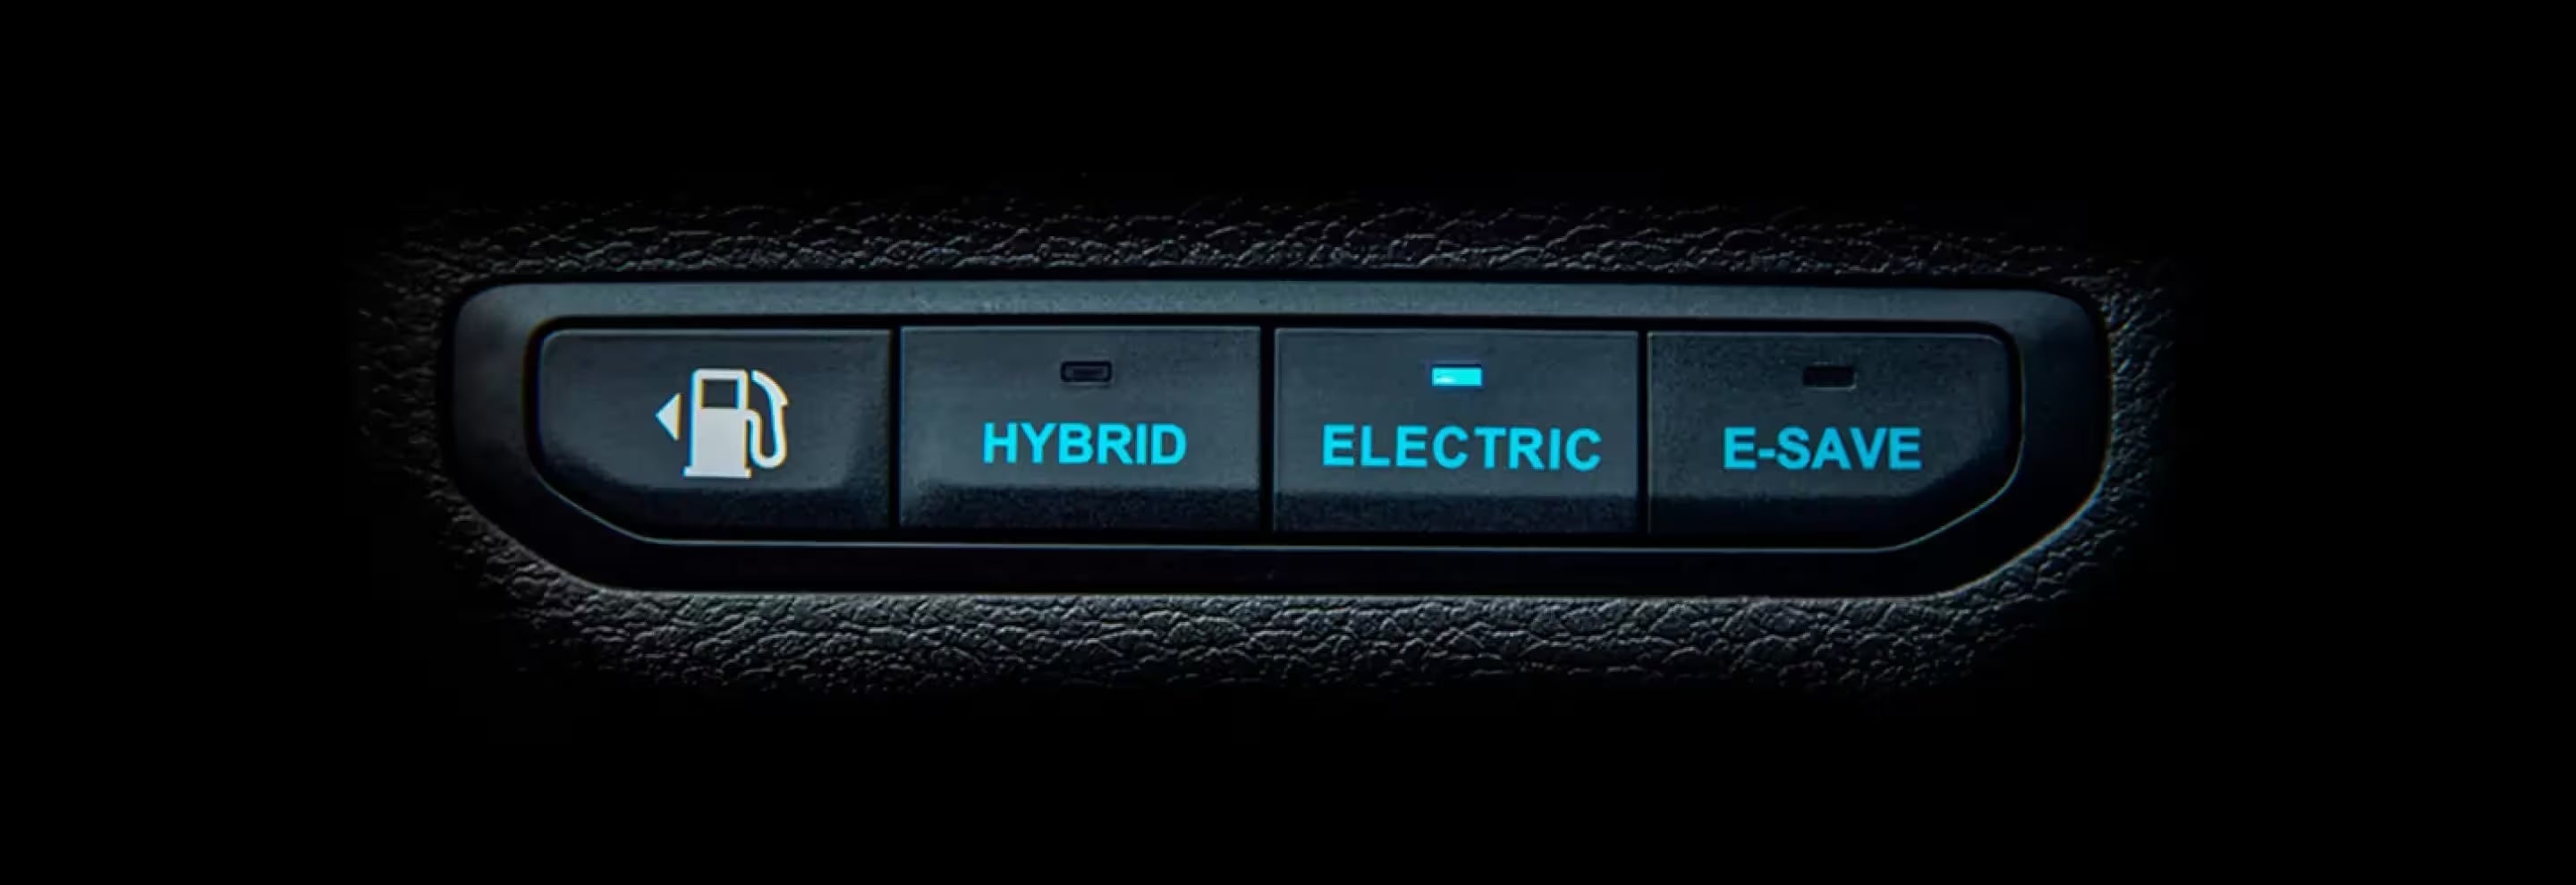 Jeep Wrangler 4xe employs three drive modes to keep you running efficiently.